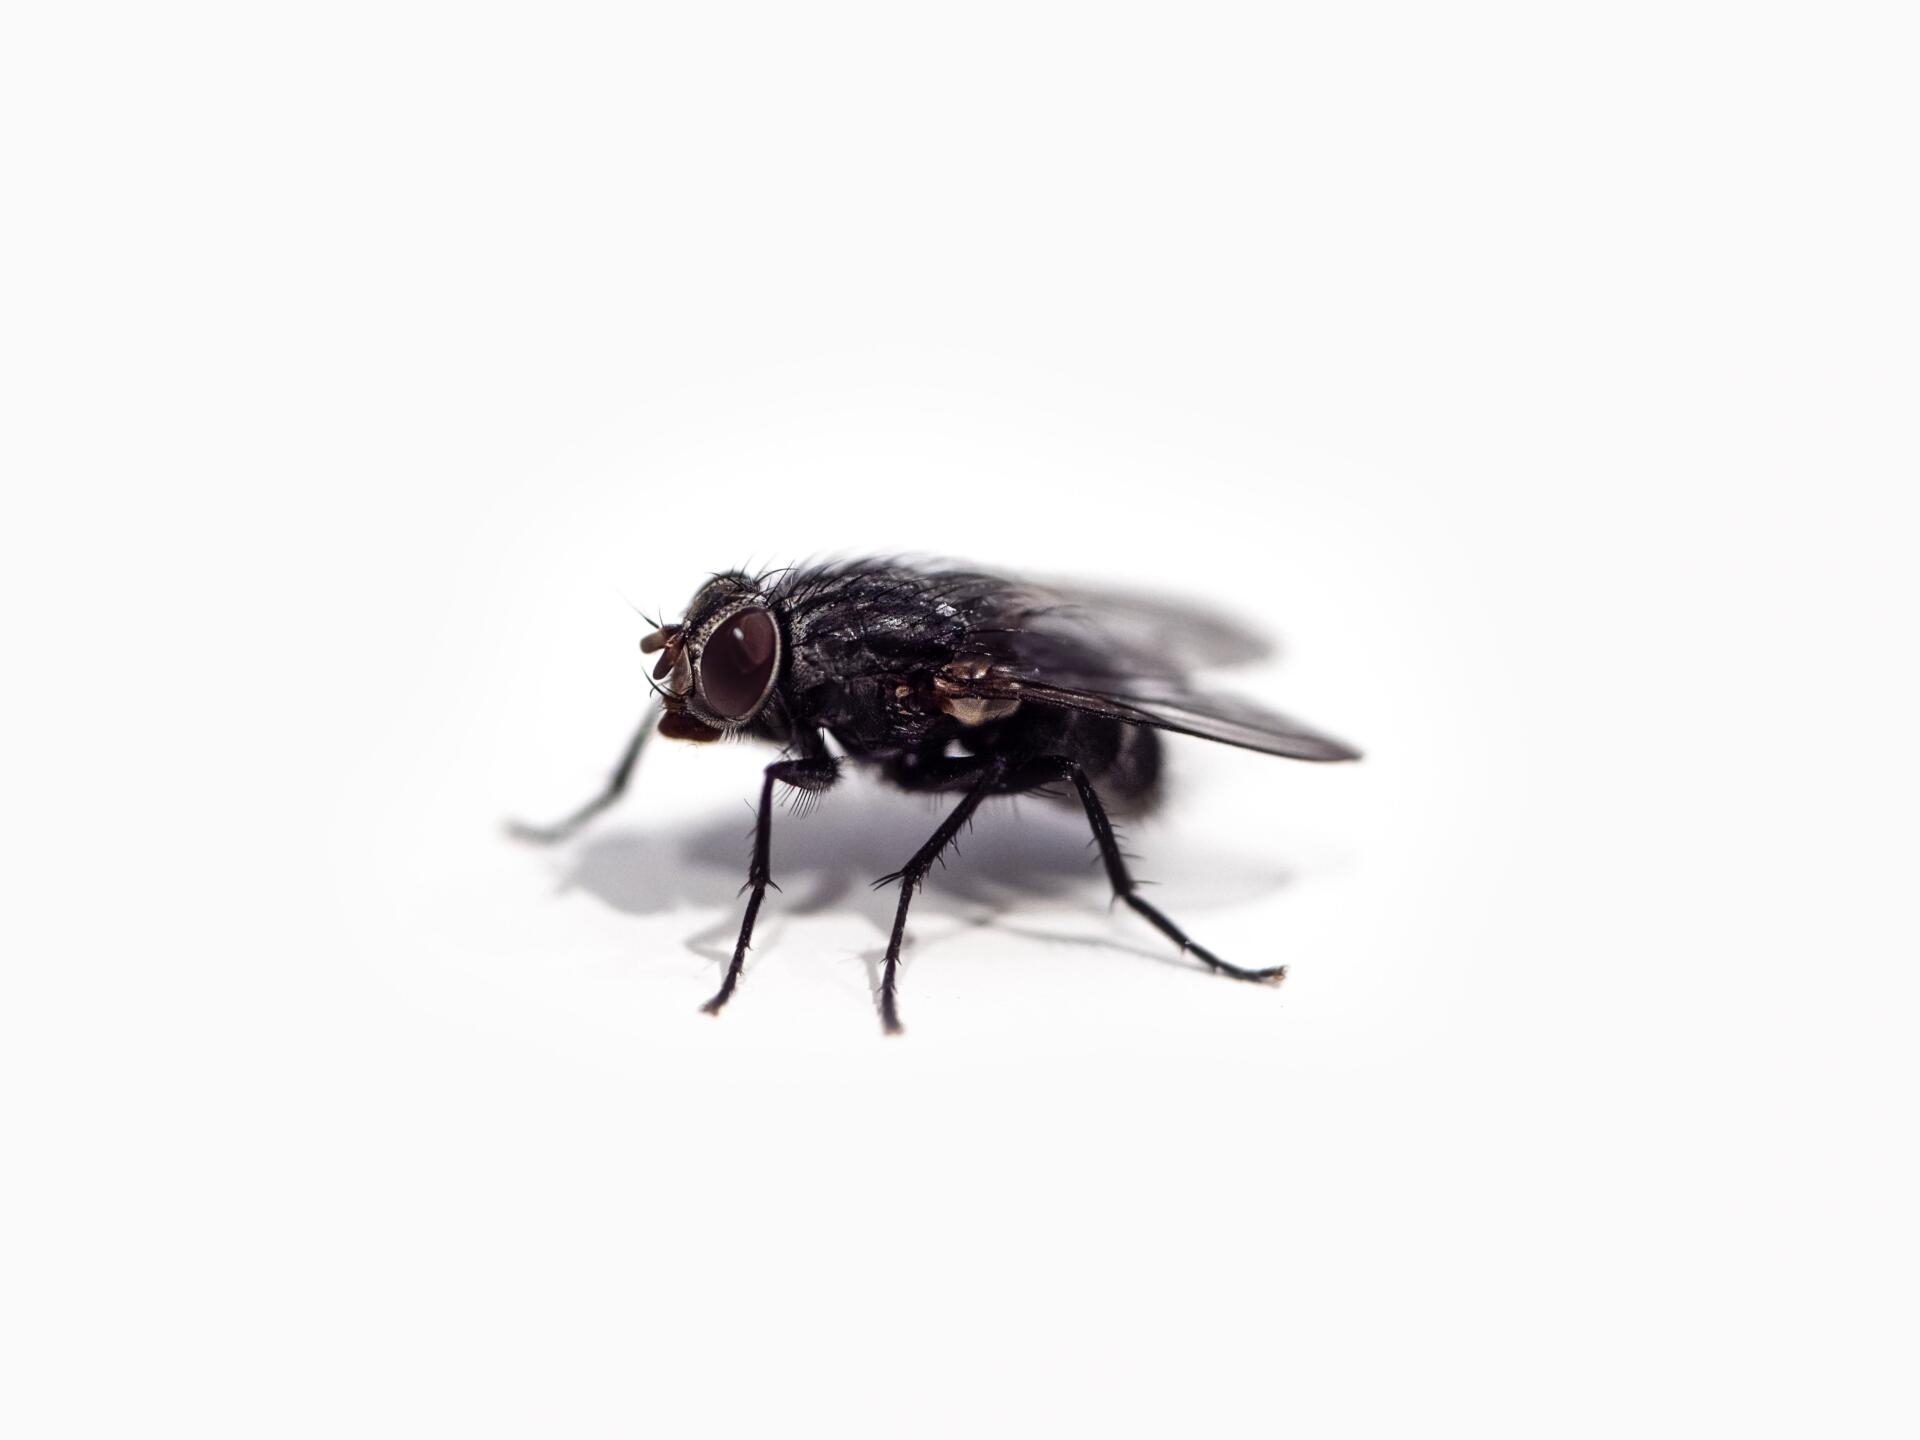 A black house fly on a white background